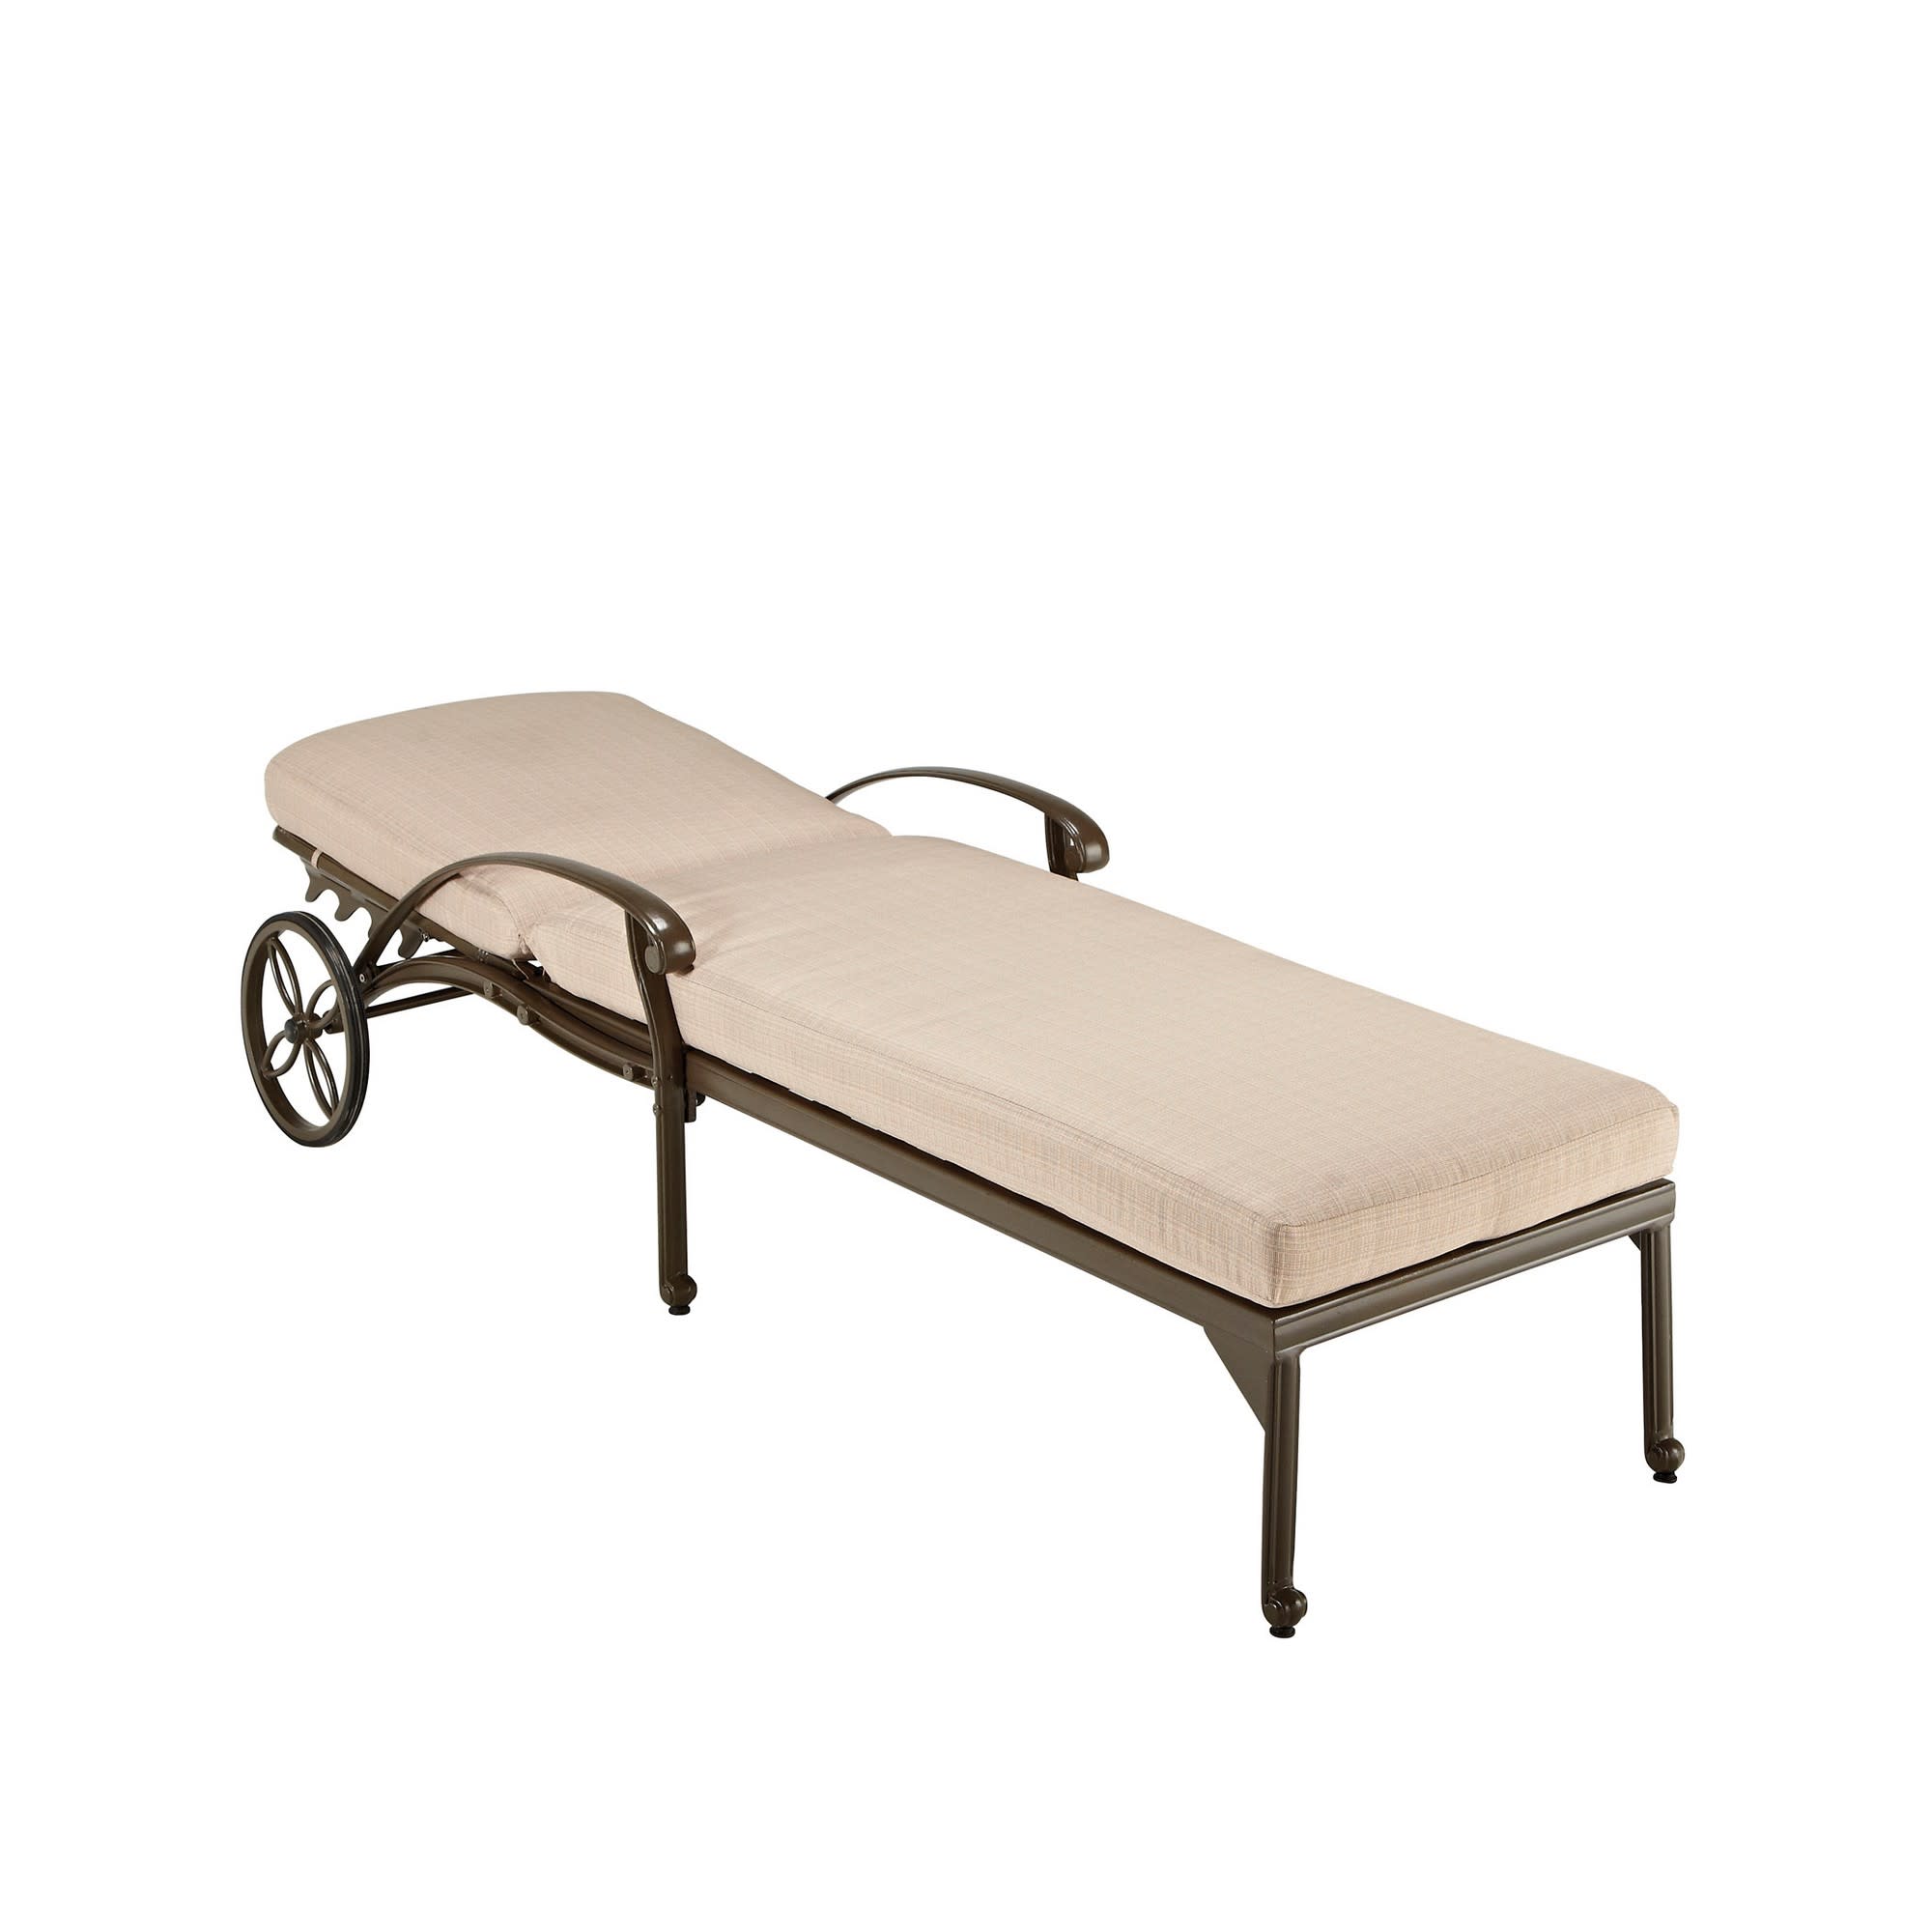 Homestyles Capri Cast Aluminum Outdoor Patio Reclining Chaise Lounge in Taupe - image 2 of 2